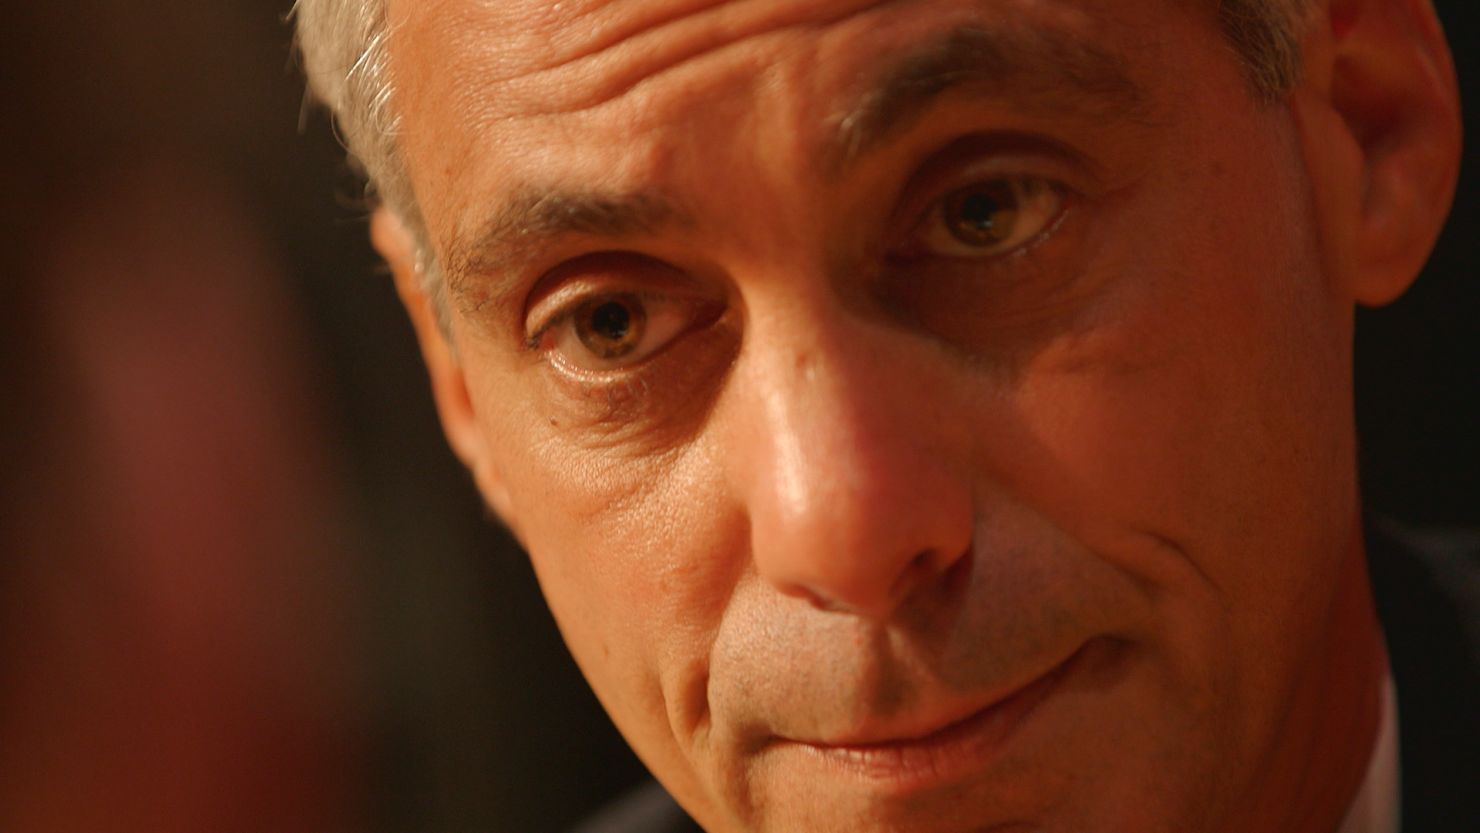 Chicago Mayor Rahm Emanuel's teenage son was the victim of an assault and robbery.